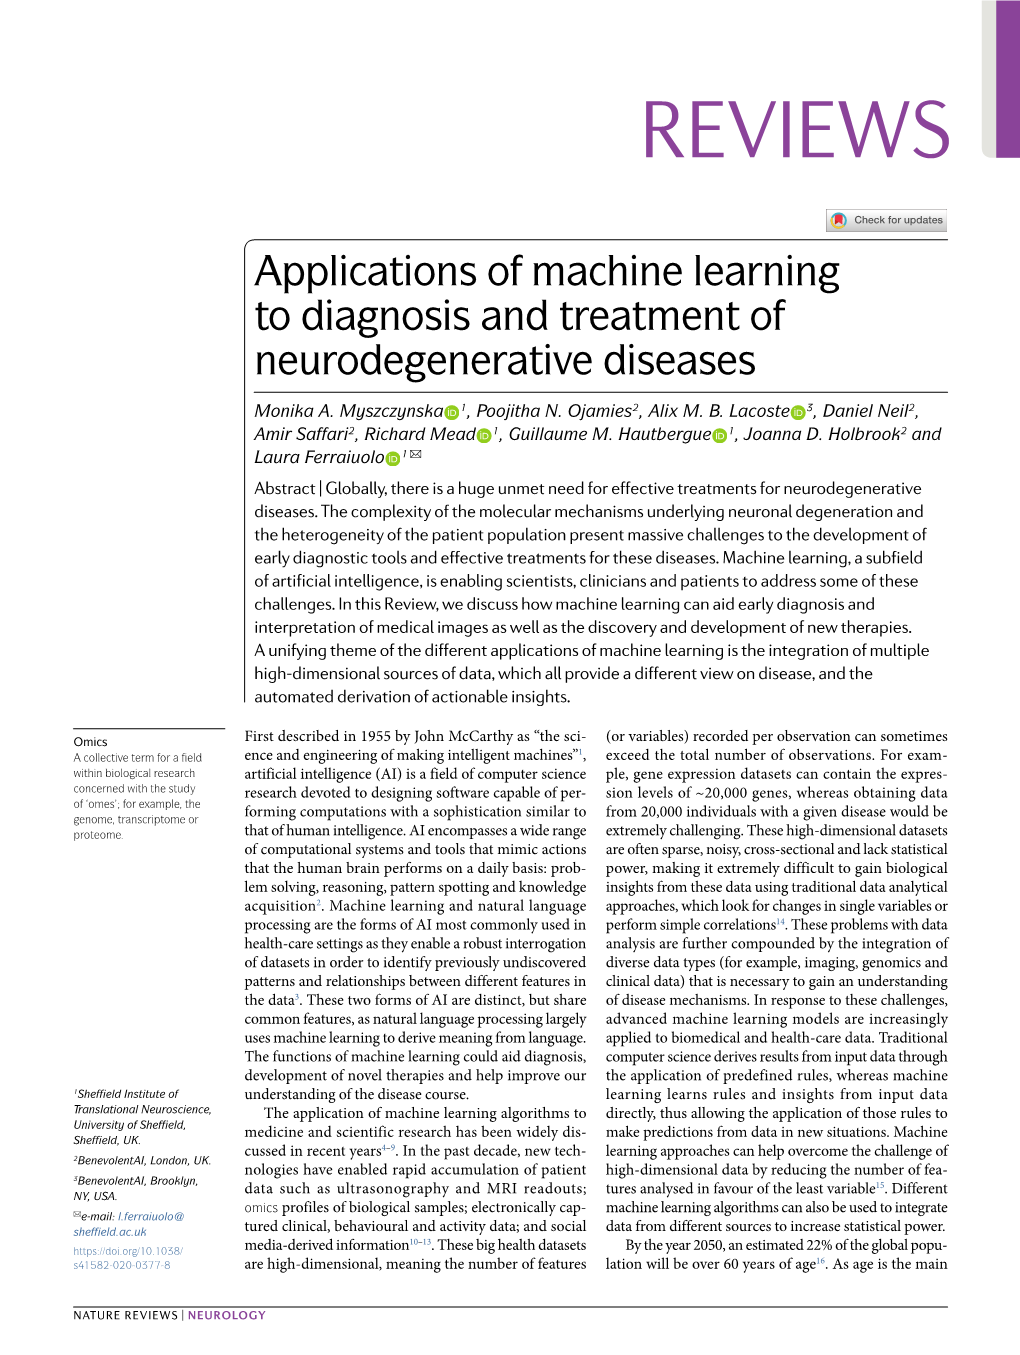 Applications of Machine Learning to Diagnosis and Treatment of Neurodegenerative Diseases